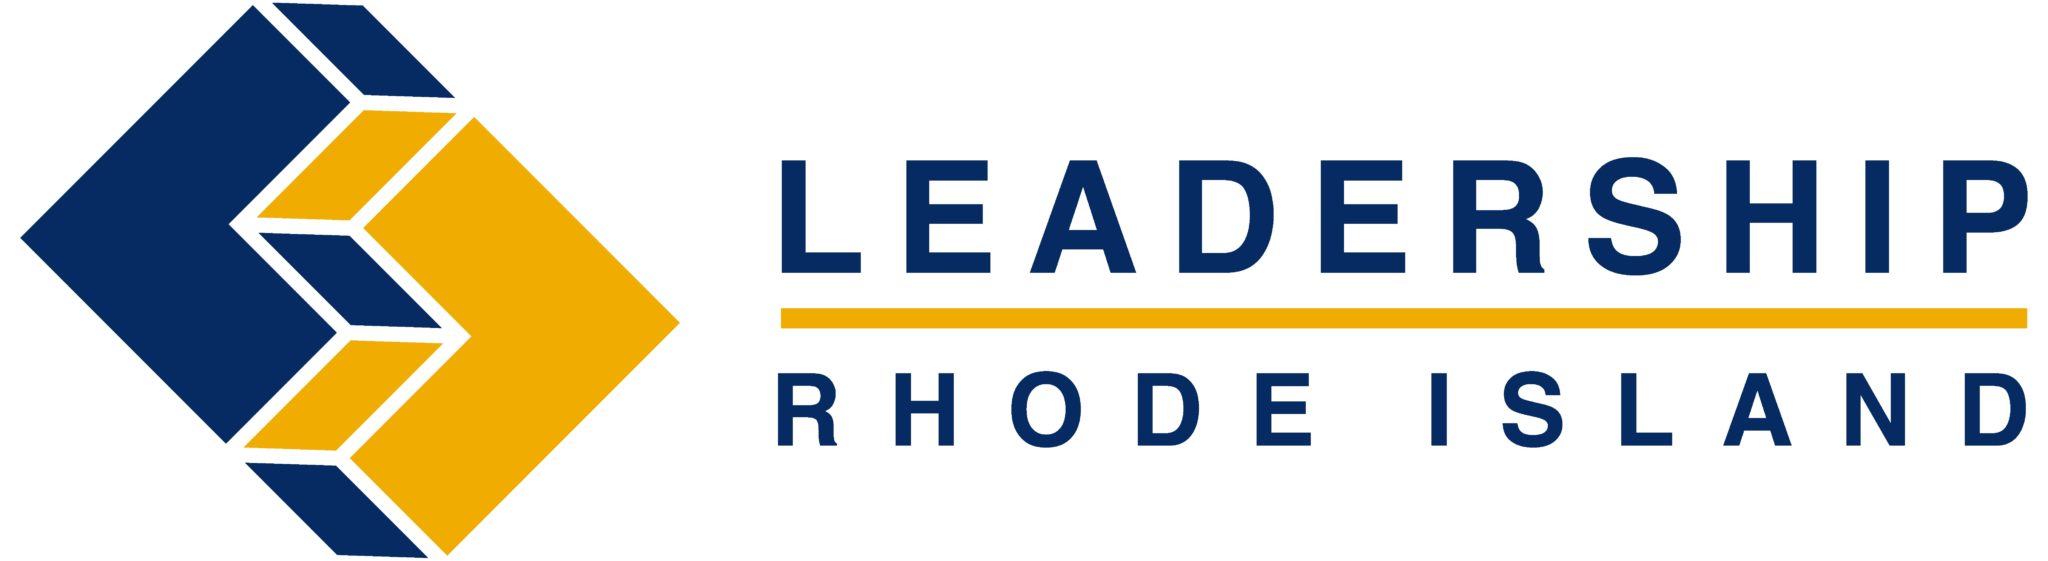 LEADERSHIP RHODE ISLAND will receive the Excellence in Innovation Award from the Association of Leadership Programs on Friday